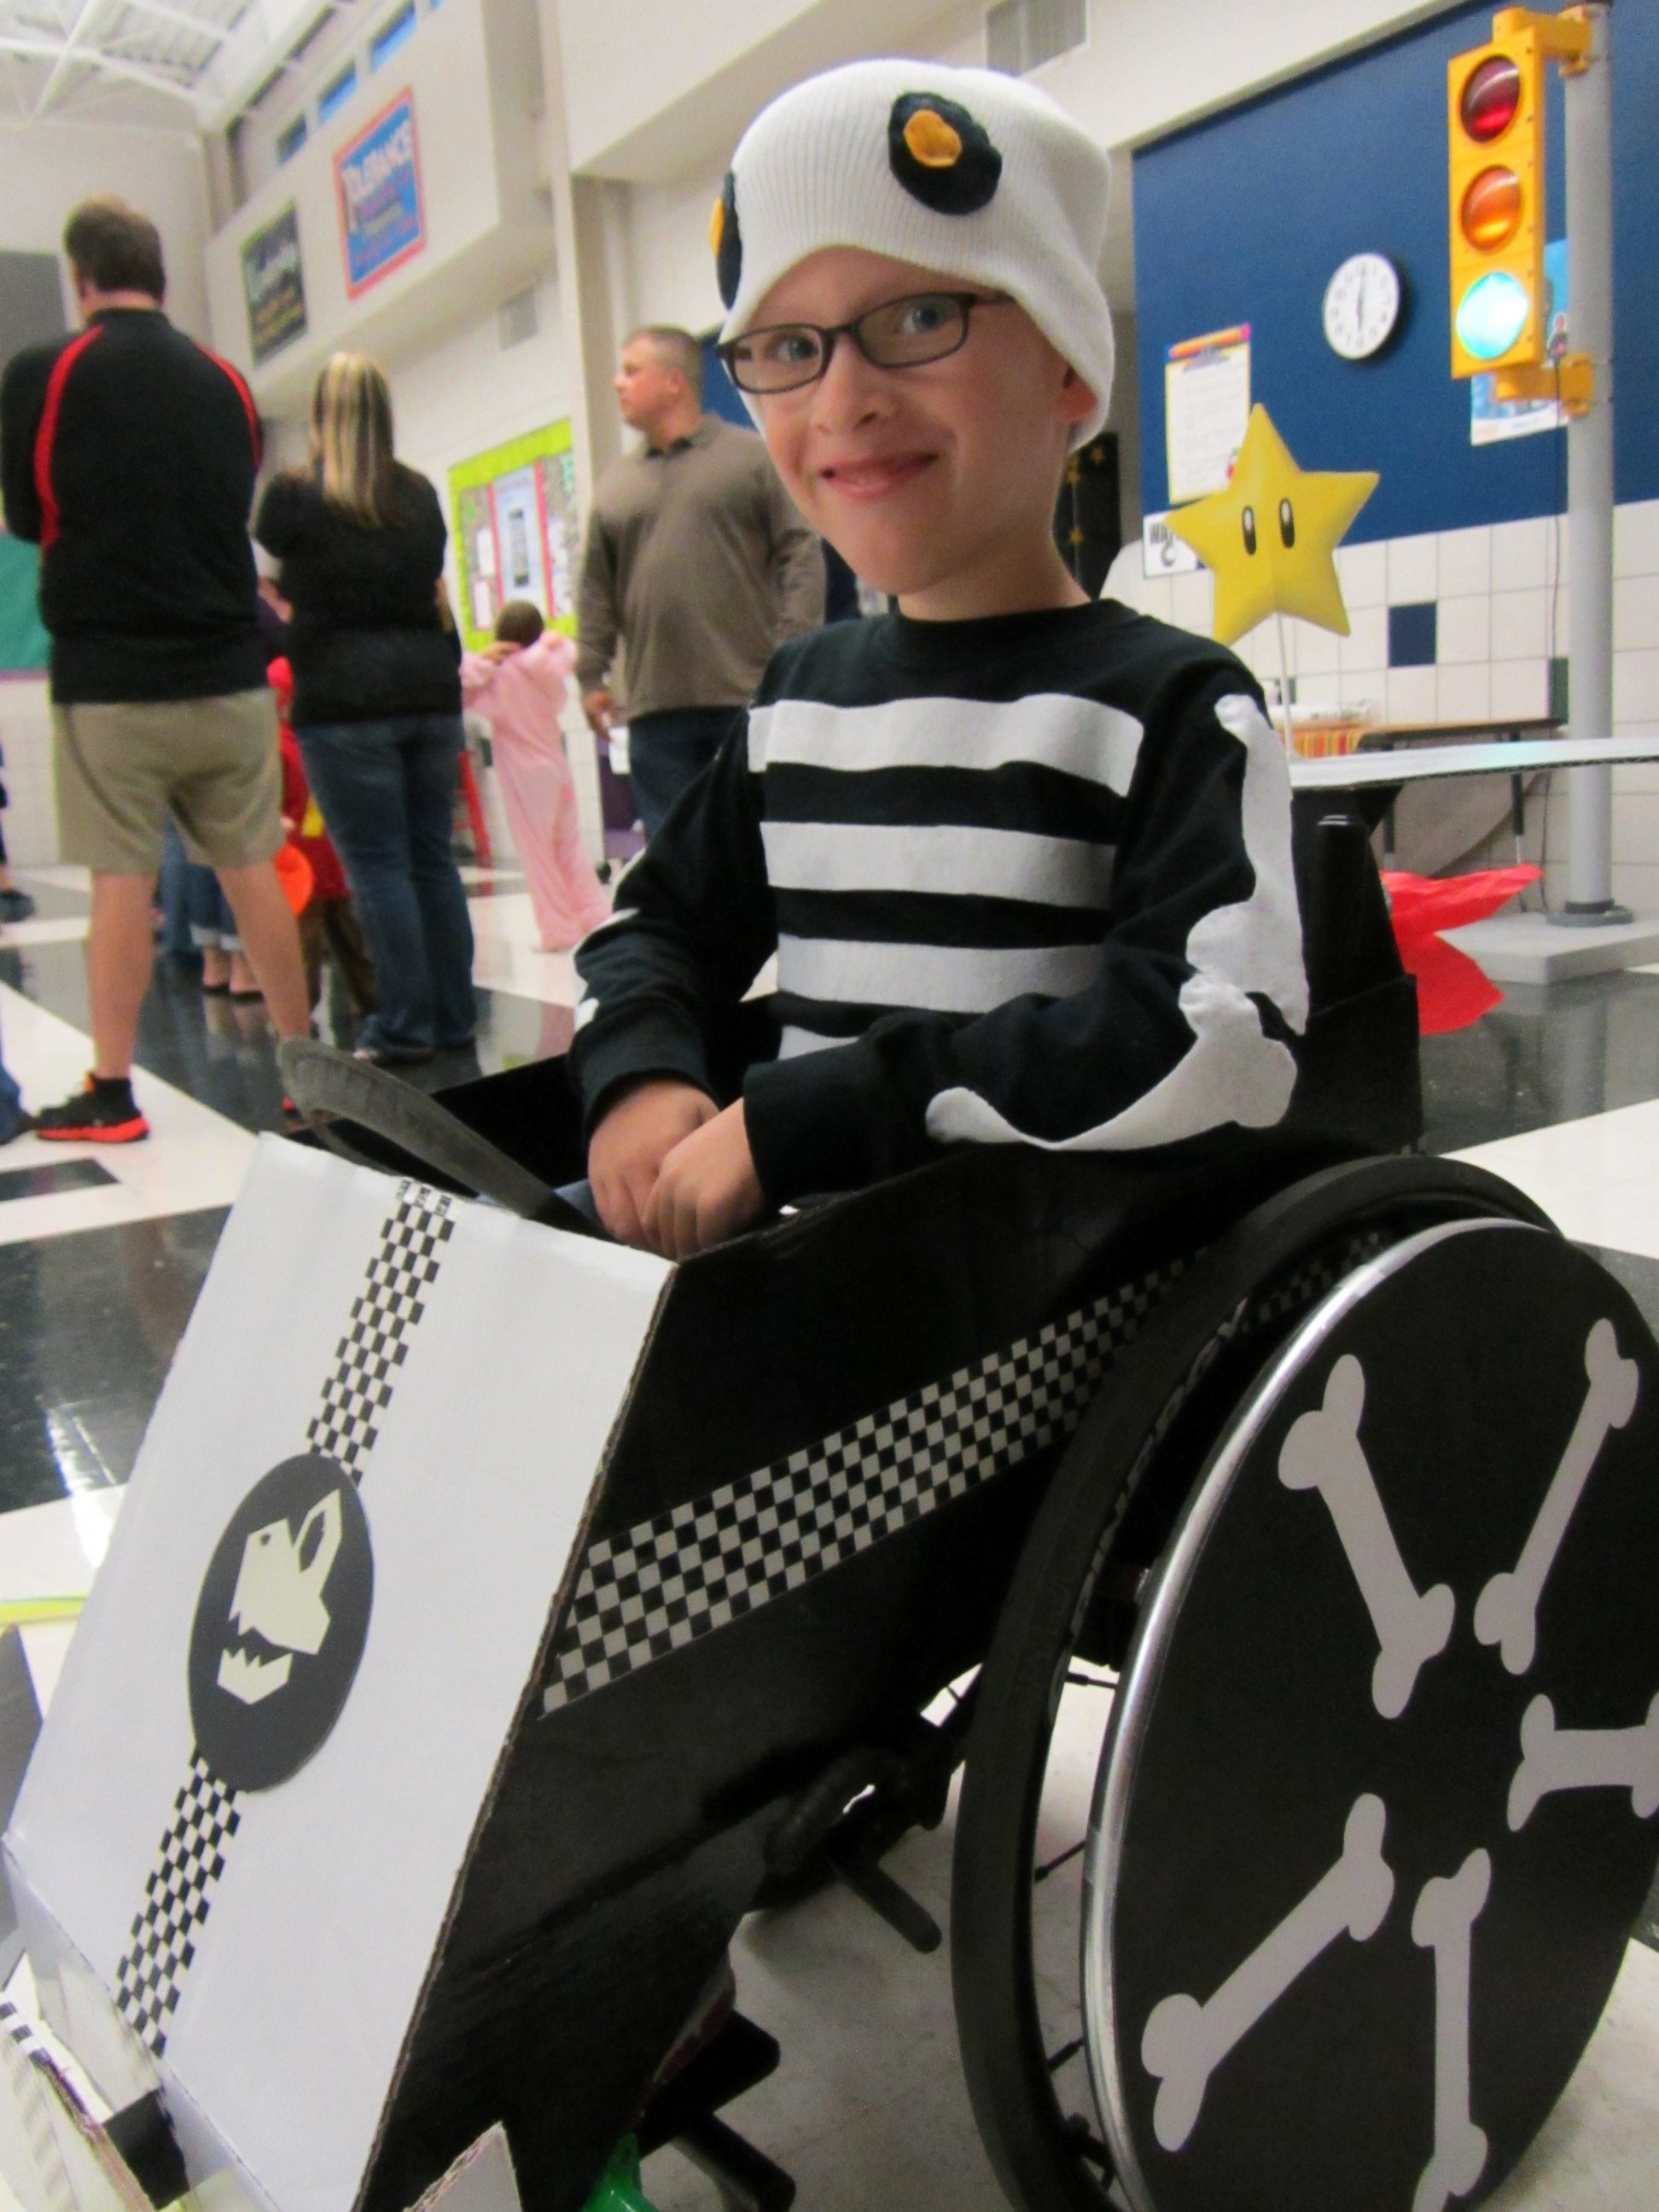 PHOTO: Caleb McLelland is pictured here at age 7 as Dry Bones in a "MarioKart" wheelchair designed by his mother Cassie McLelland for Halloween 2012. 